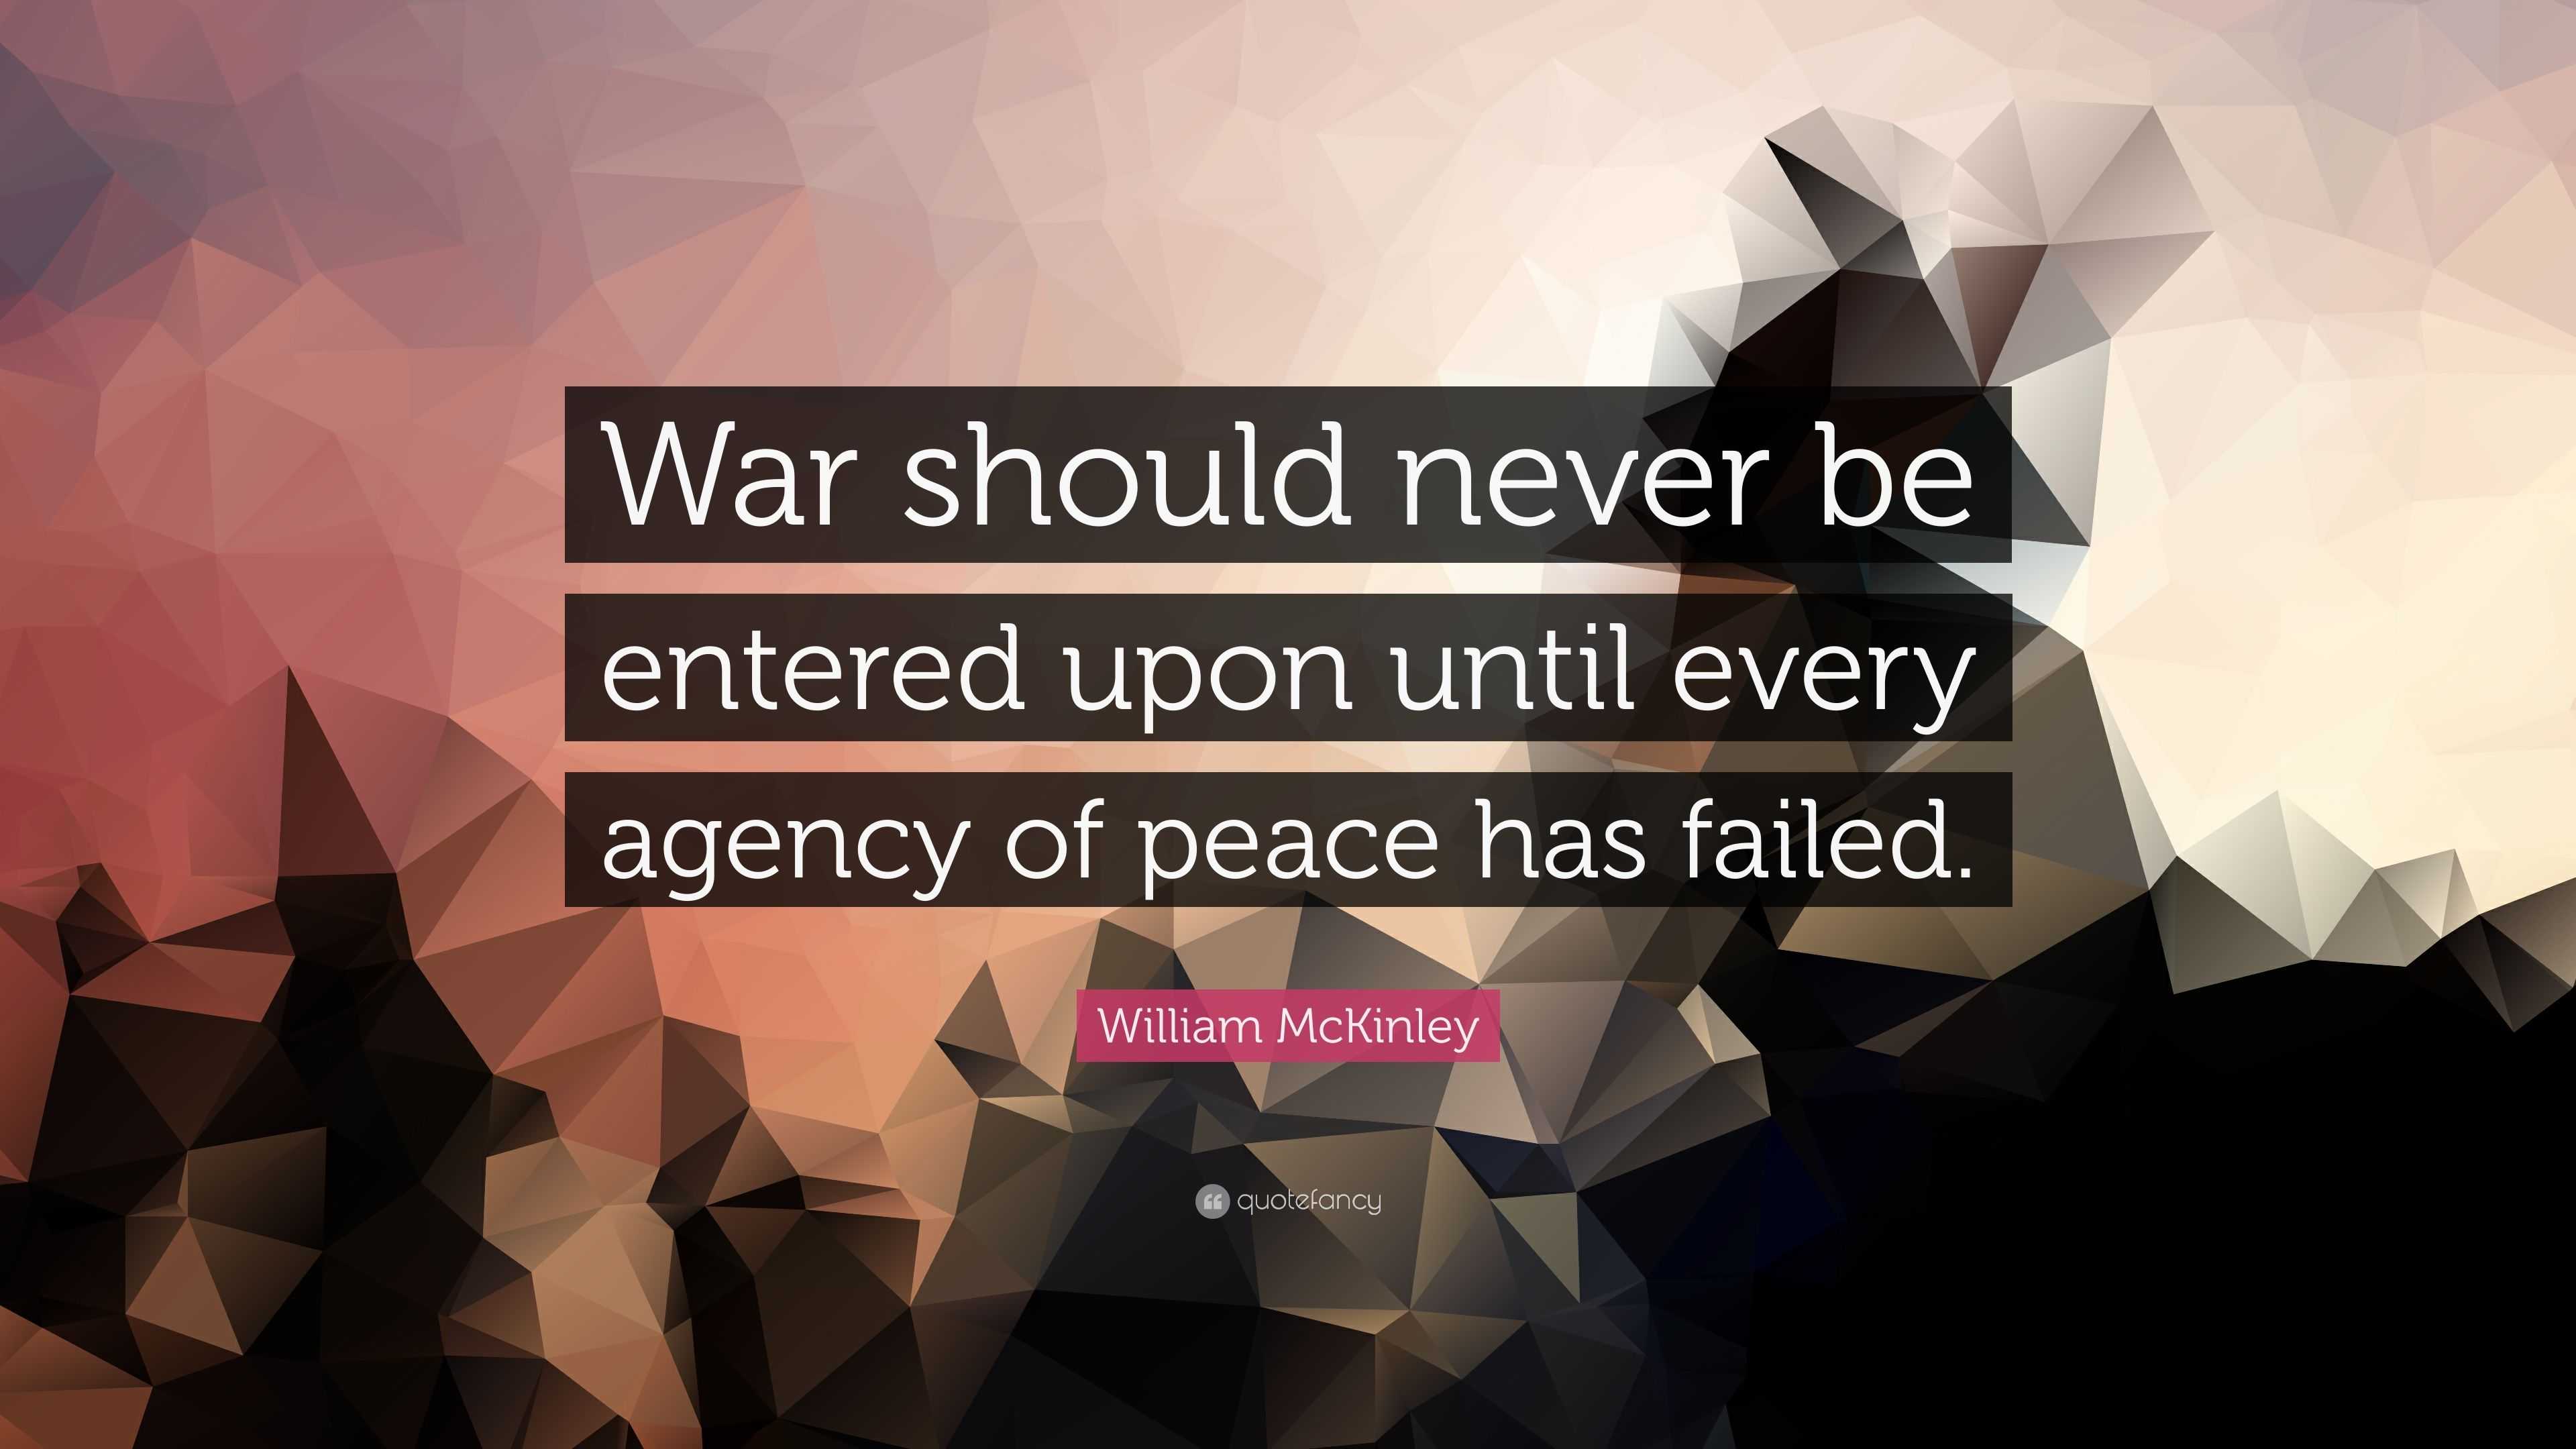 William McKinley Quote: "War should never be entered upon until every agency of peace has failed ...